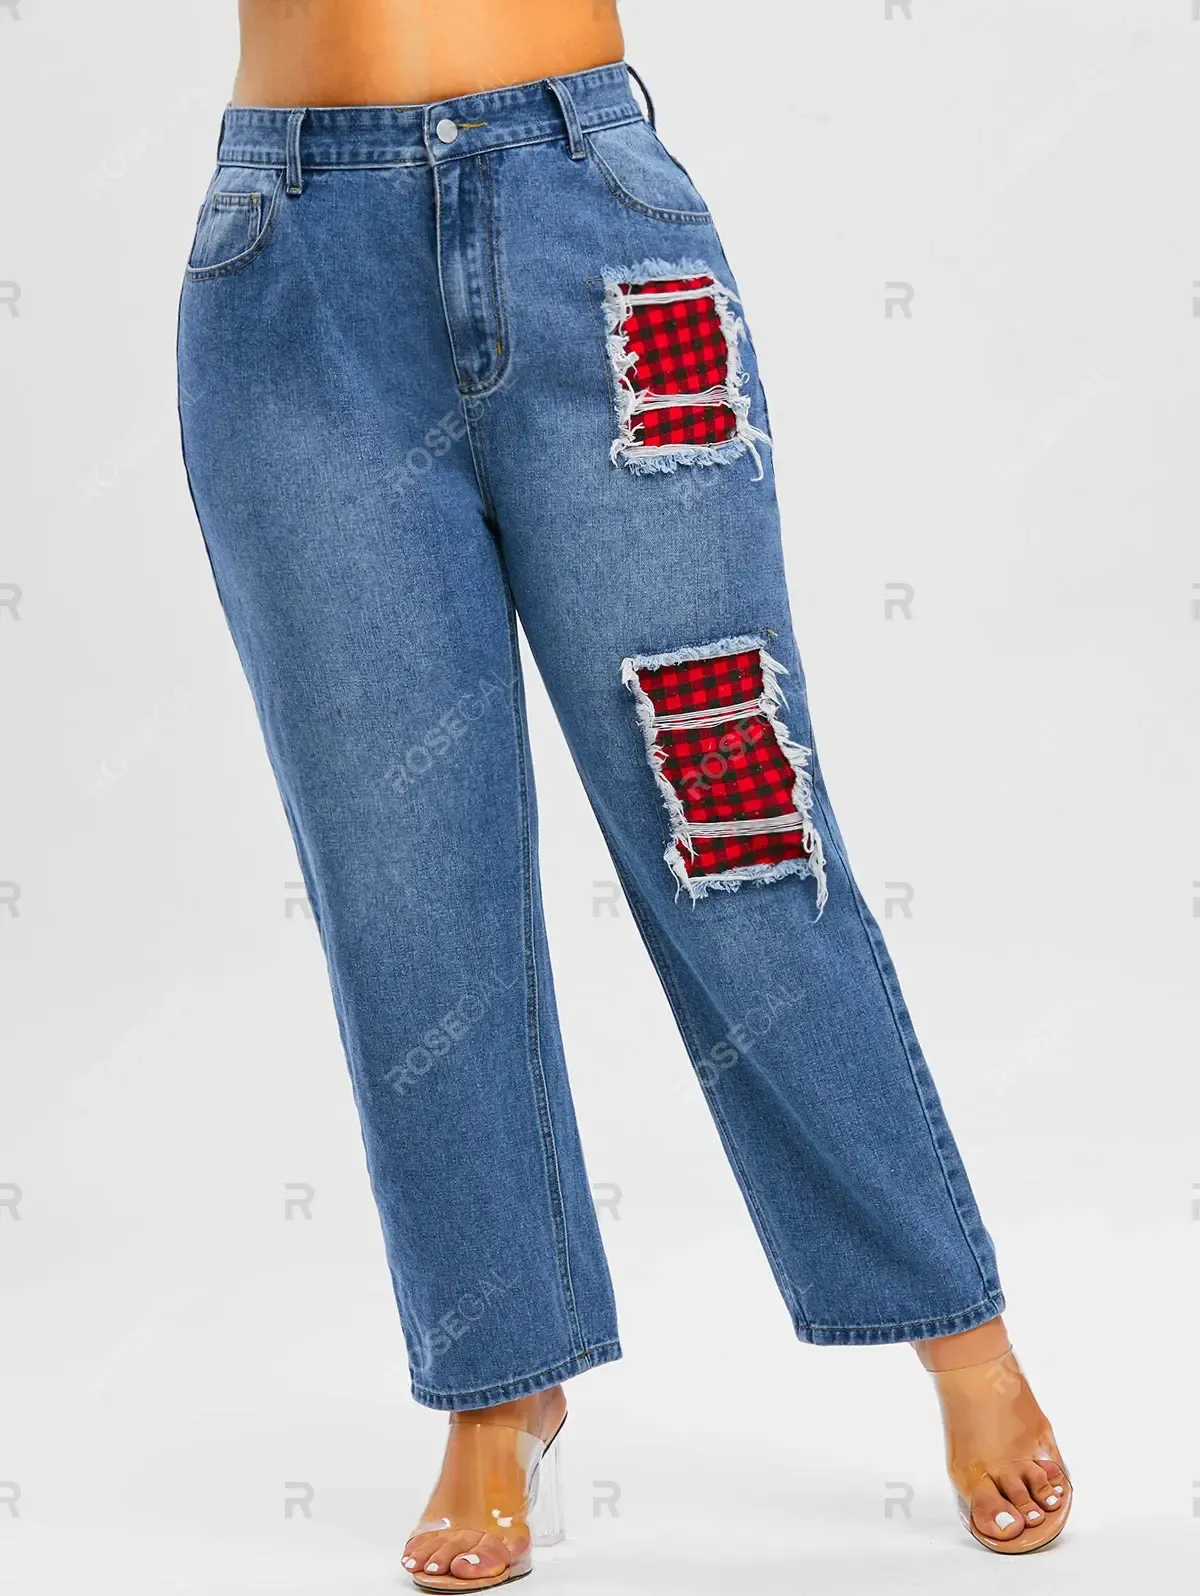 Plaid Button Up Shirt and Distressed Mom Jeans Plus Size Outfit - Red